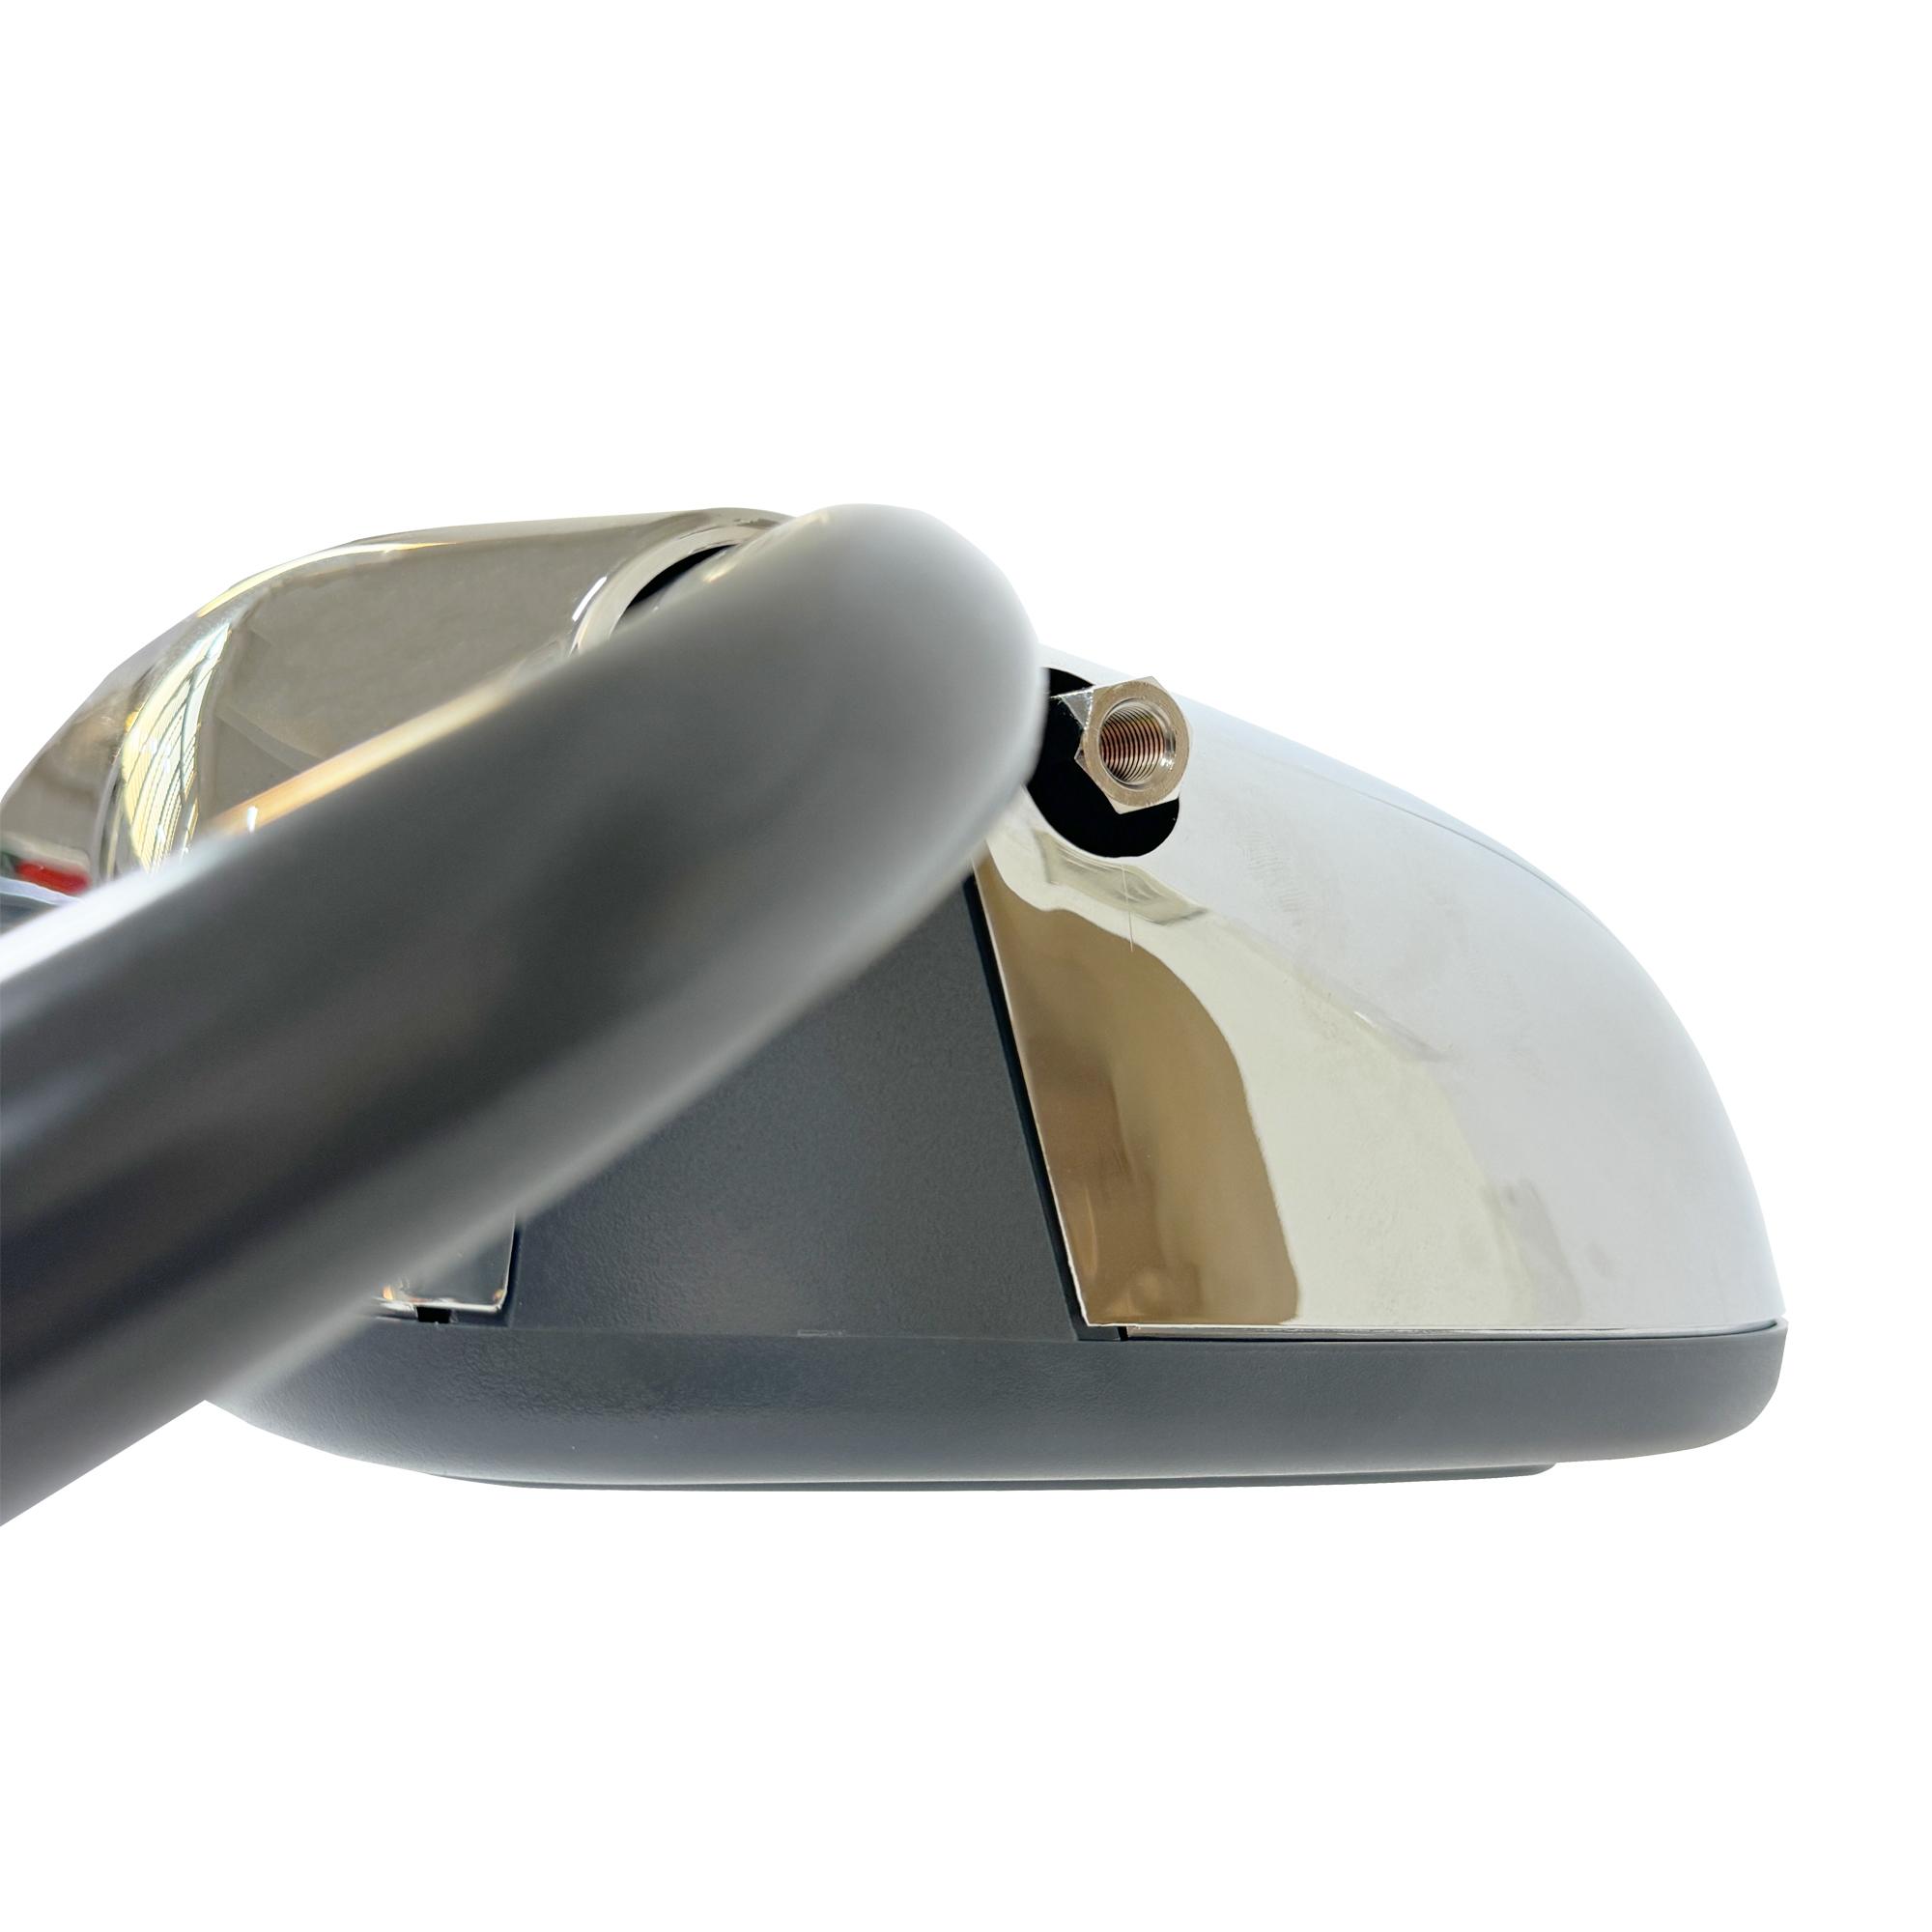 SPLENDID Replacement Side mirror, Power mirror, Heated, Chrome cover, for 2002-2015 Freightliner Columbia, 2001-2010 Freightliner Coronado, 1996-2010 Freightliner Century, Passenger Side